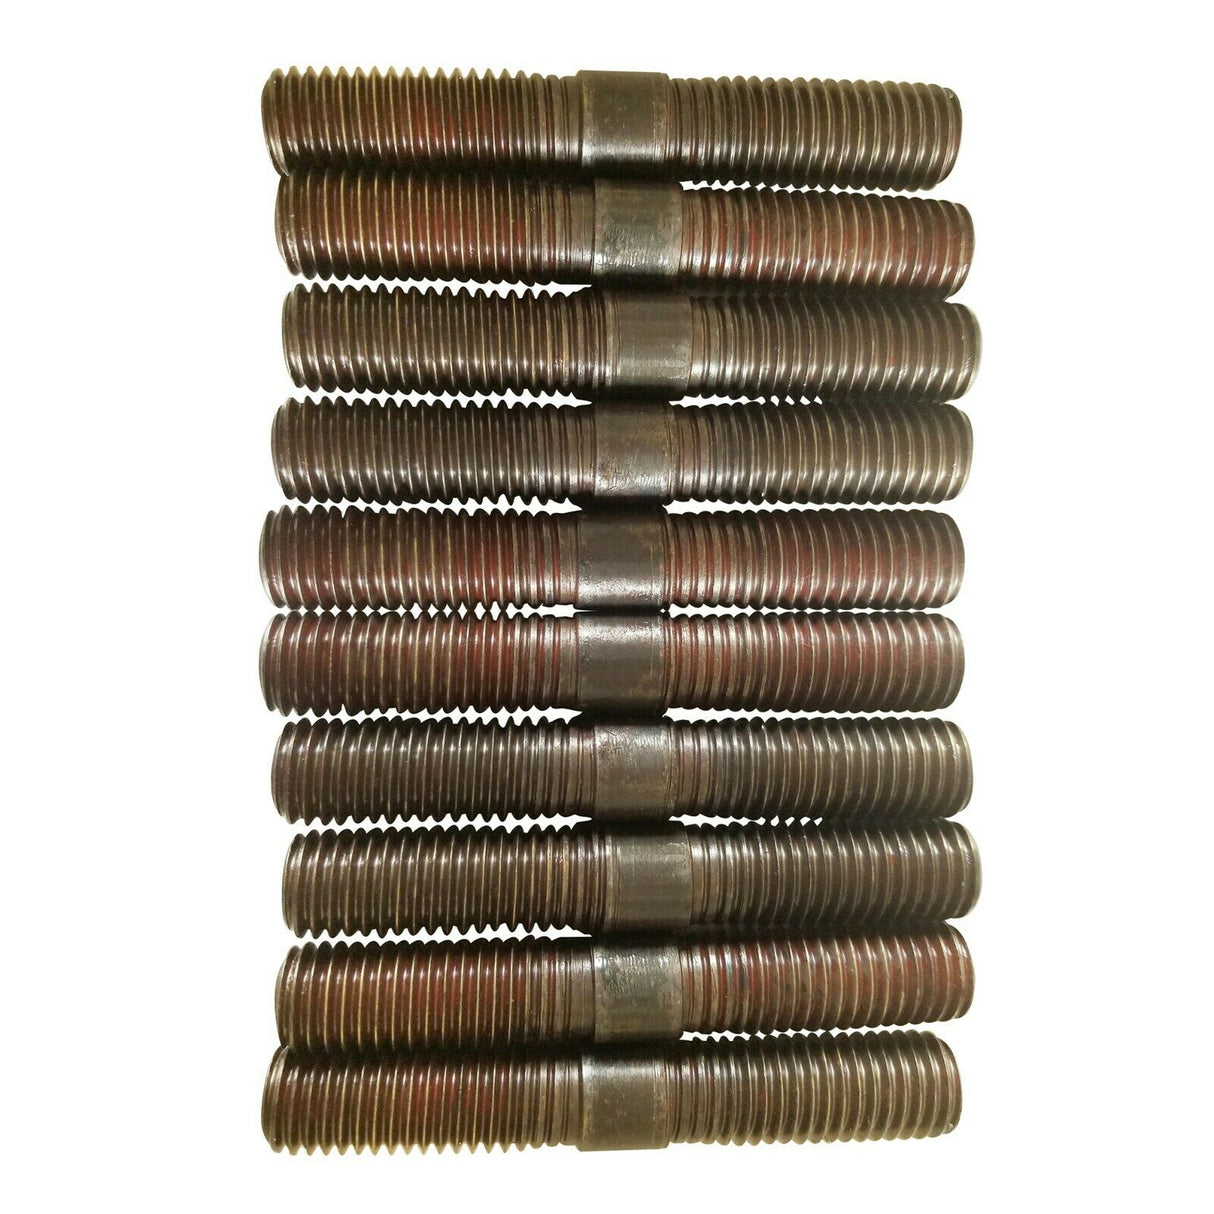 TURNER 5/8-11 X 3" ROLLED THREAD CLAMPING STUDS - PACK OF 10